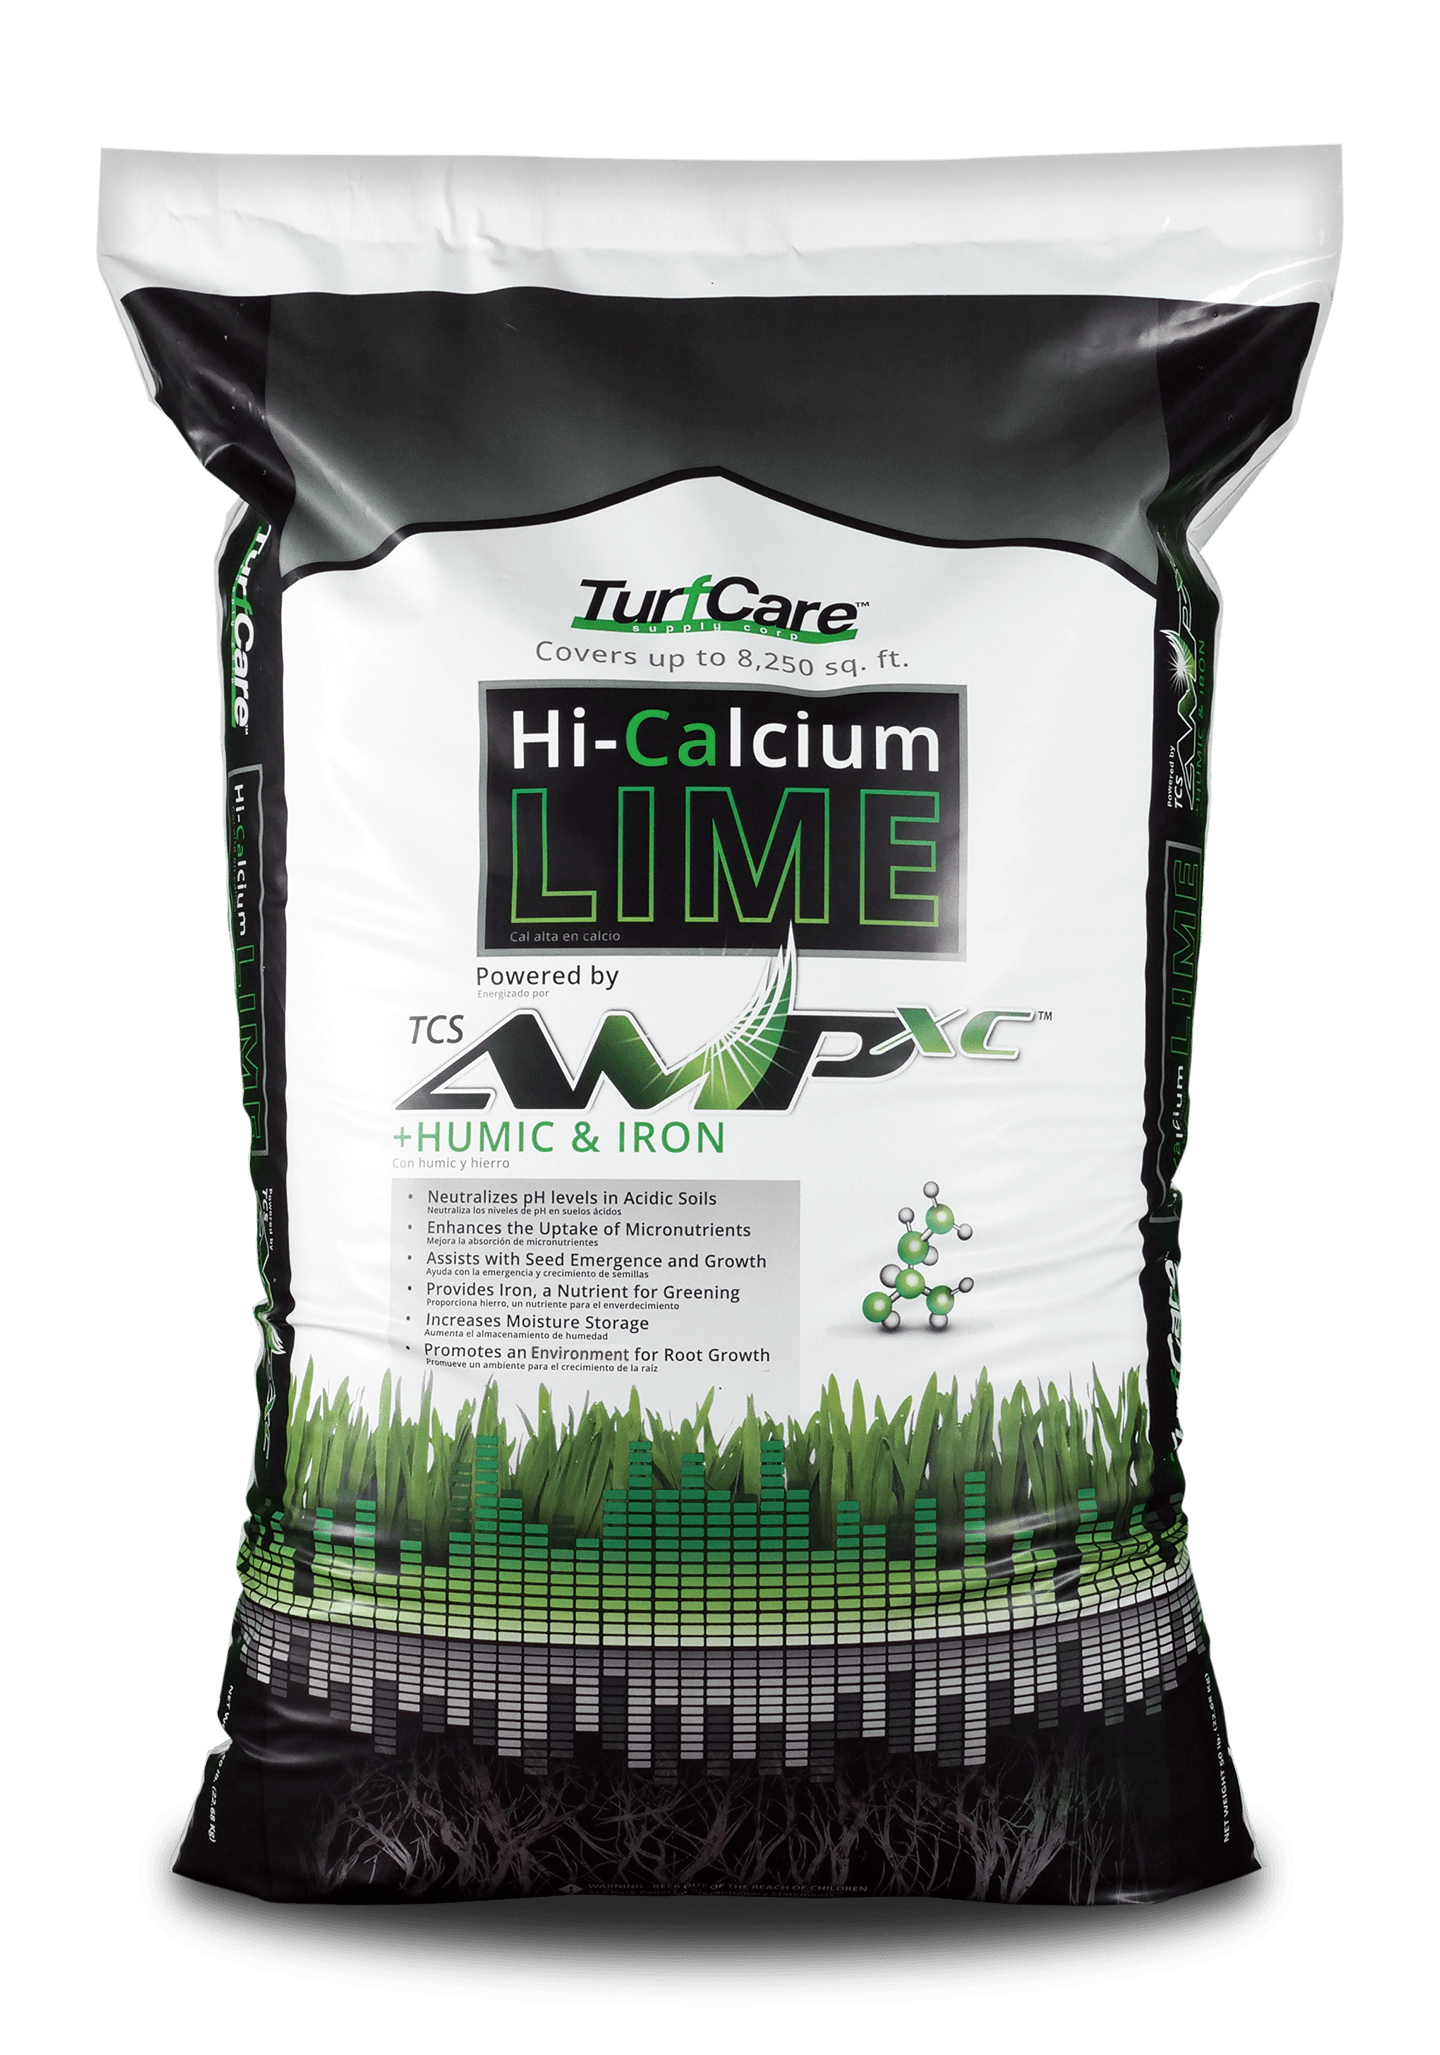 Hi-Calcium lime powered by AMP-XC